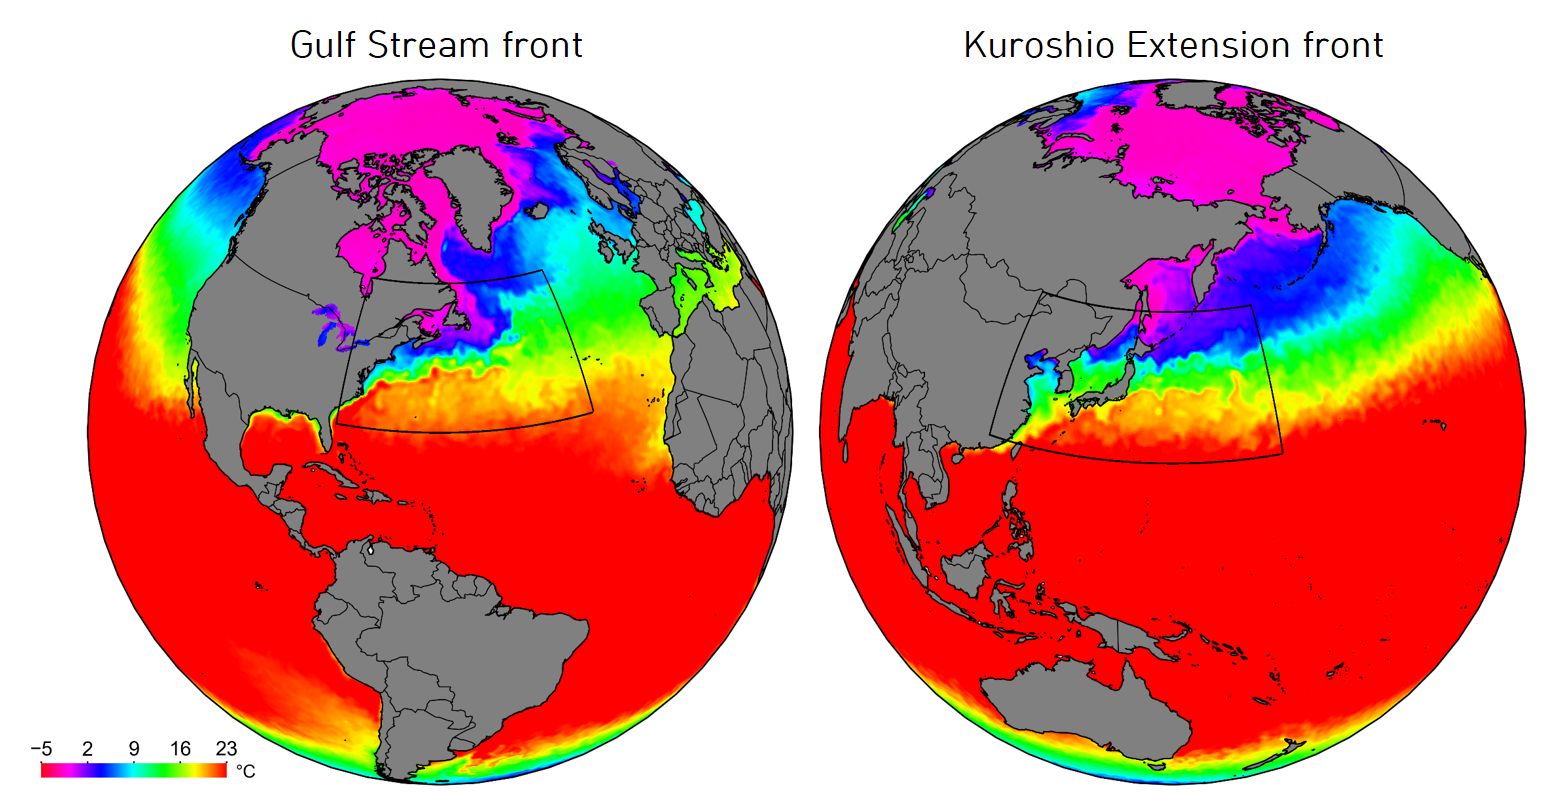 Atlantic & Pacific ocean fronts - Ocean fronts near the Gulf Stream and Kuroshio Currents that represent narrow regions where sea surface temperature sharply decreases northward.